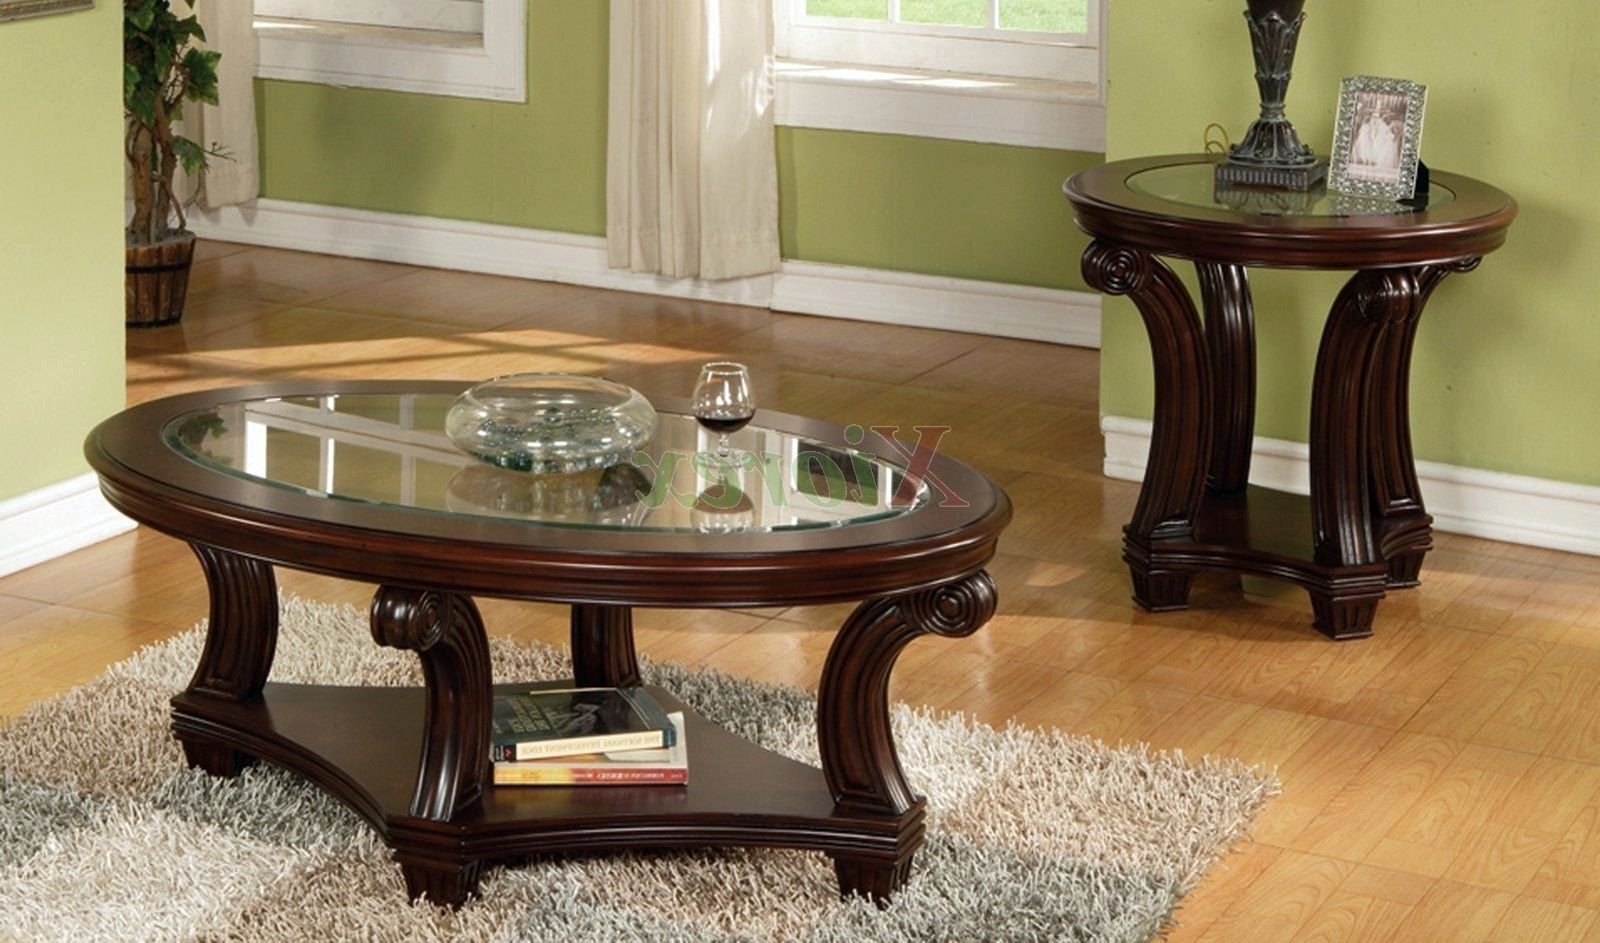 Glass And Pewter Oval Coffee Tables For Most Recent Oval Coffee Table Sets Decorating Ideas (View 6 of 20)